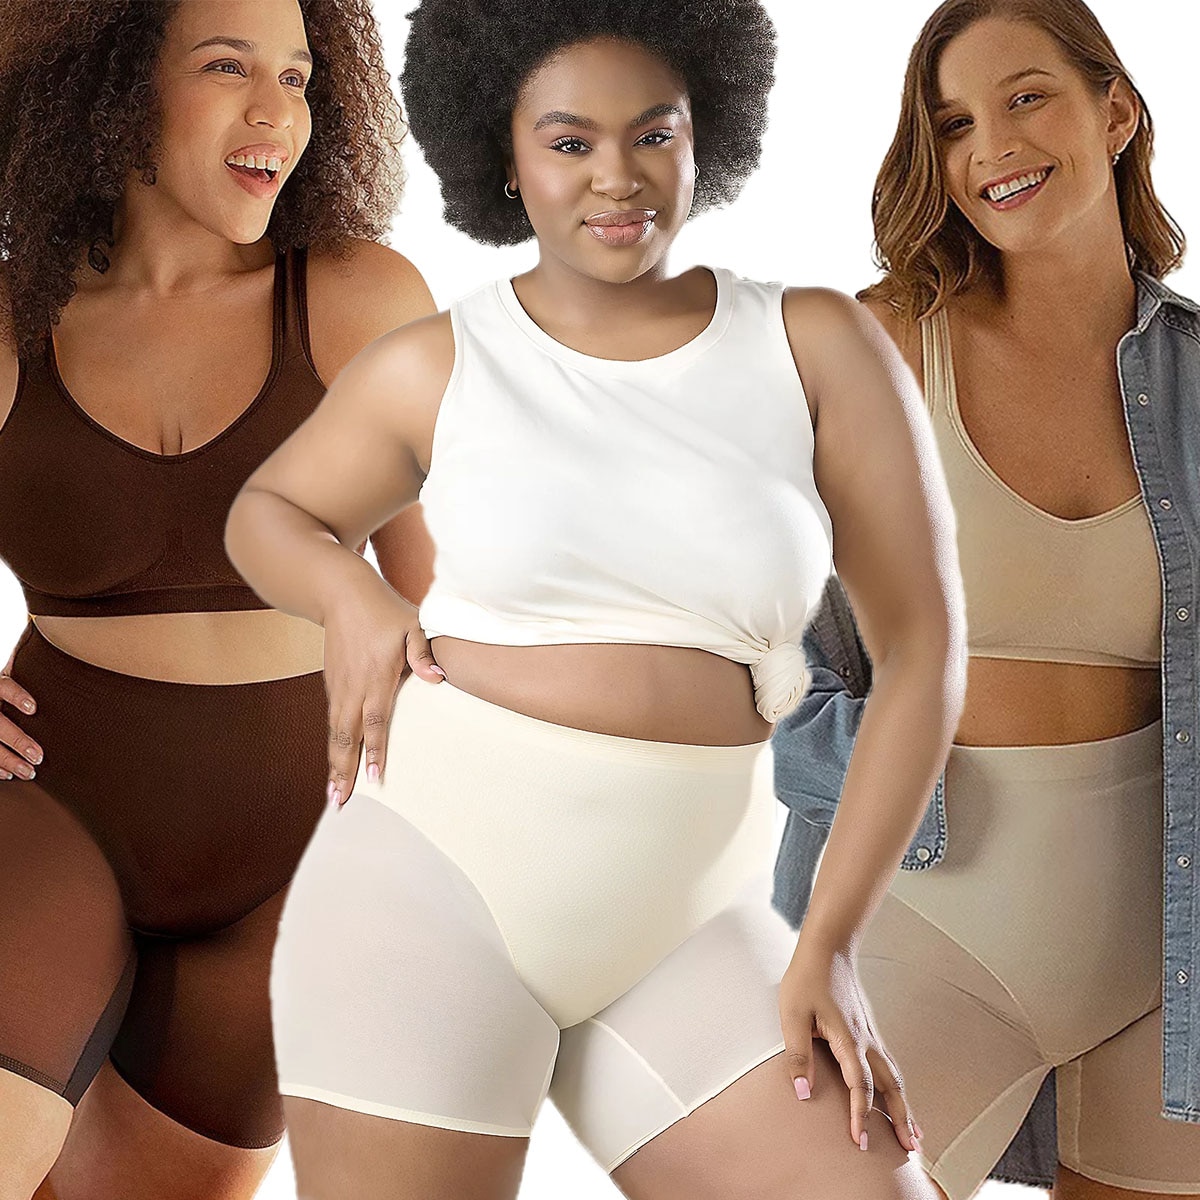 Shapermint - The easiest way to shop shapewear online: Silhouette